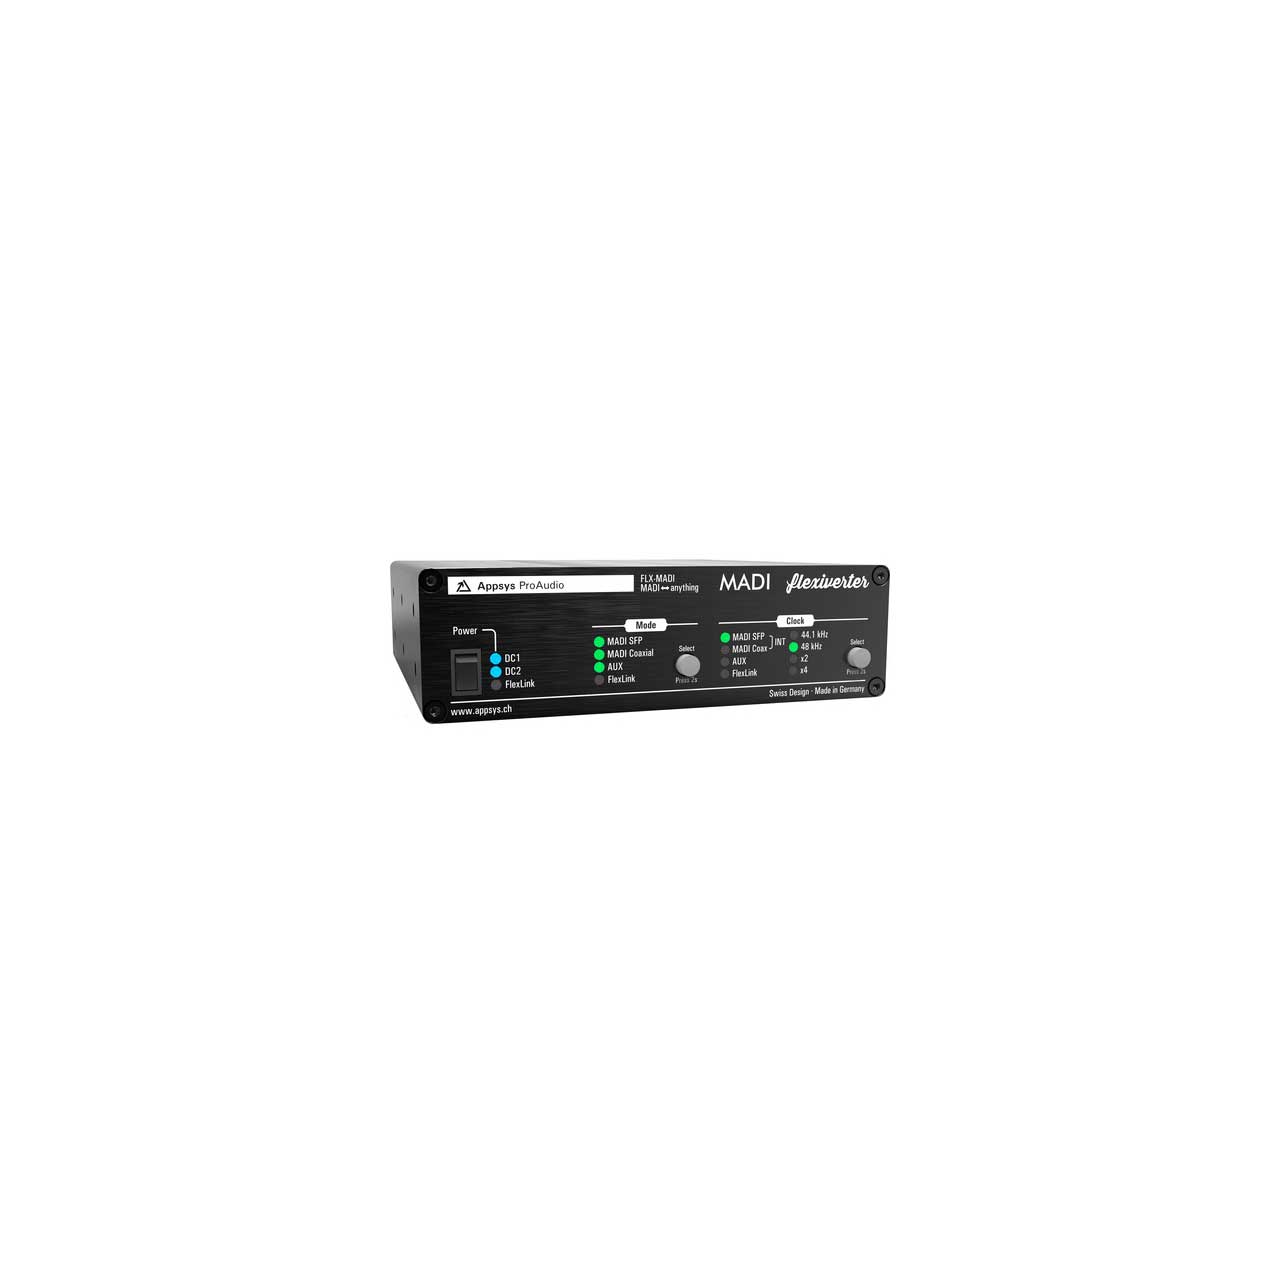 Appsys Pro Audio Flexiverter MADI 128 x 128 Channel Format Converter for MADI Optical and Coaxial FLX-MADI